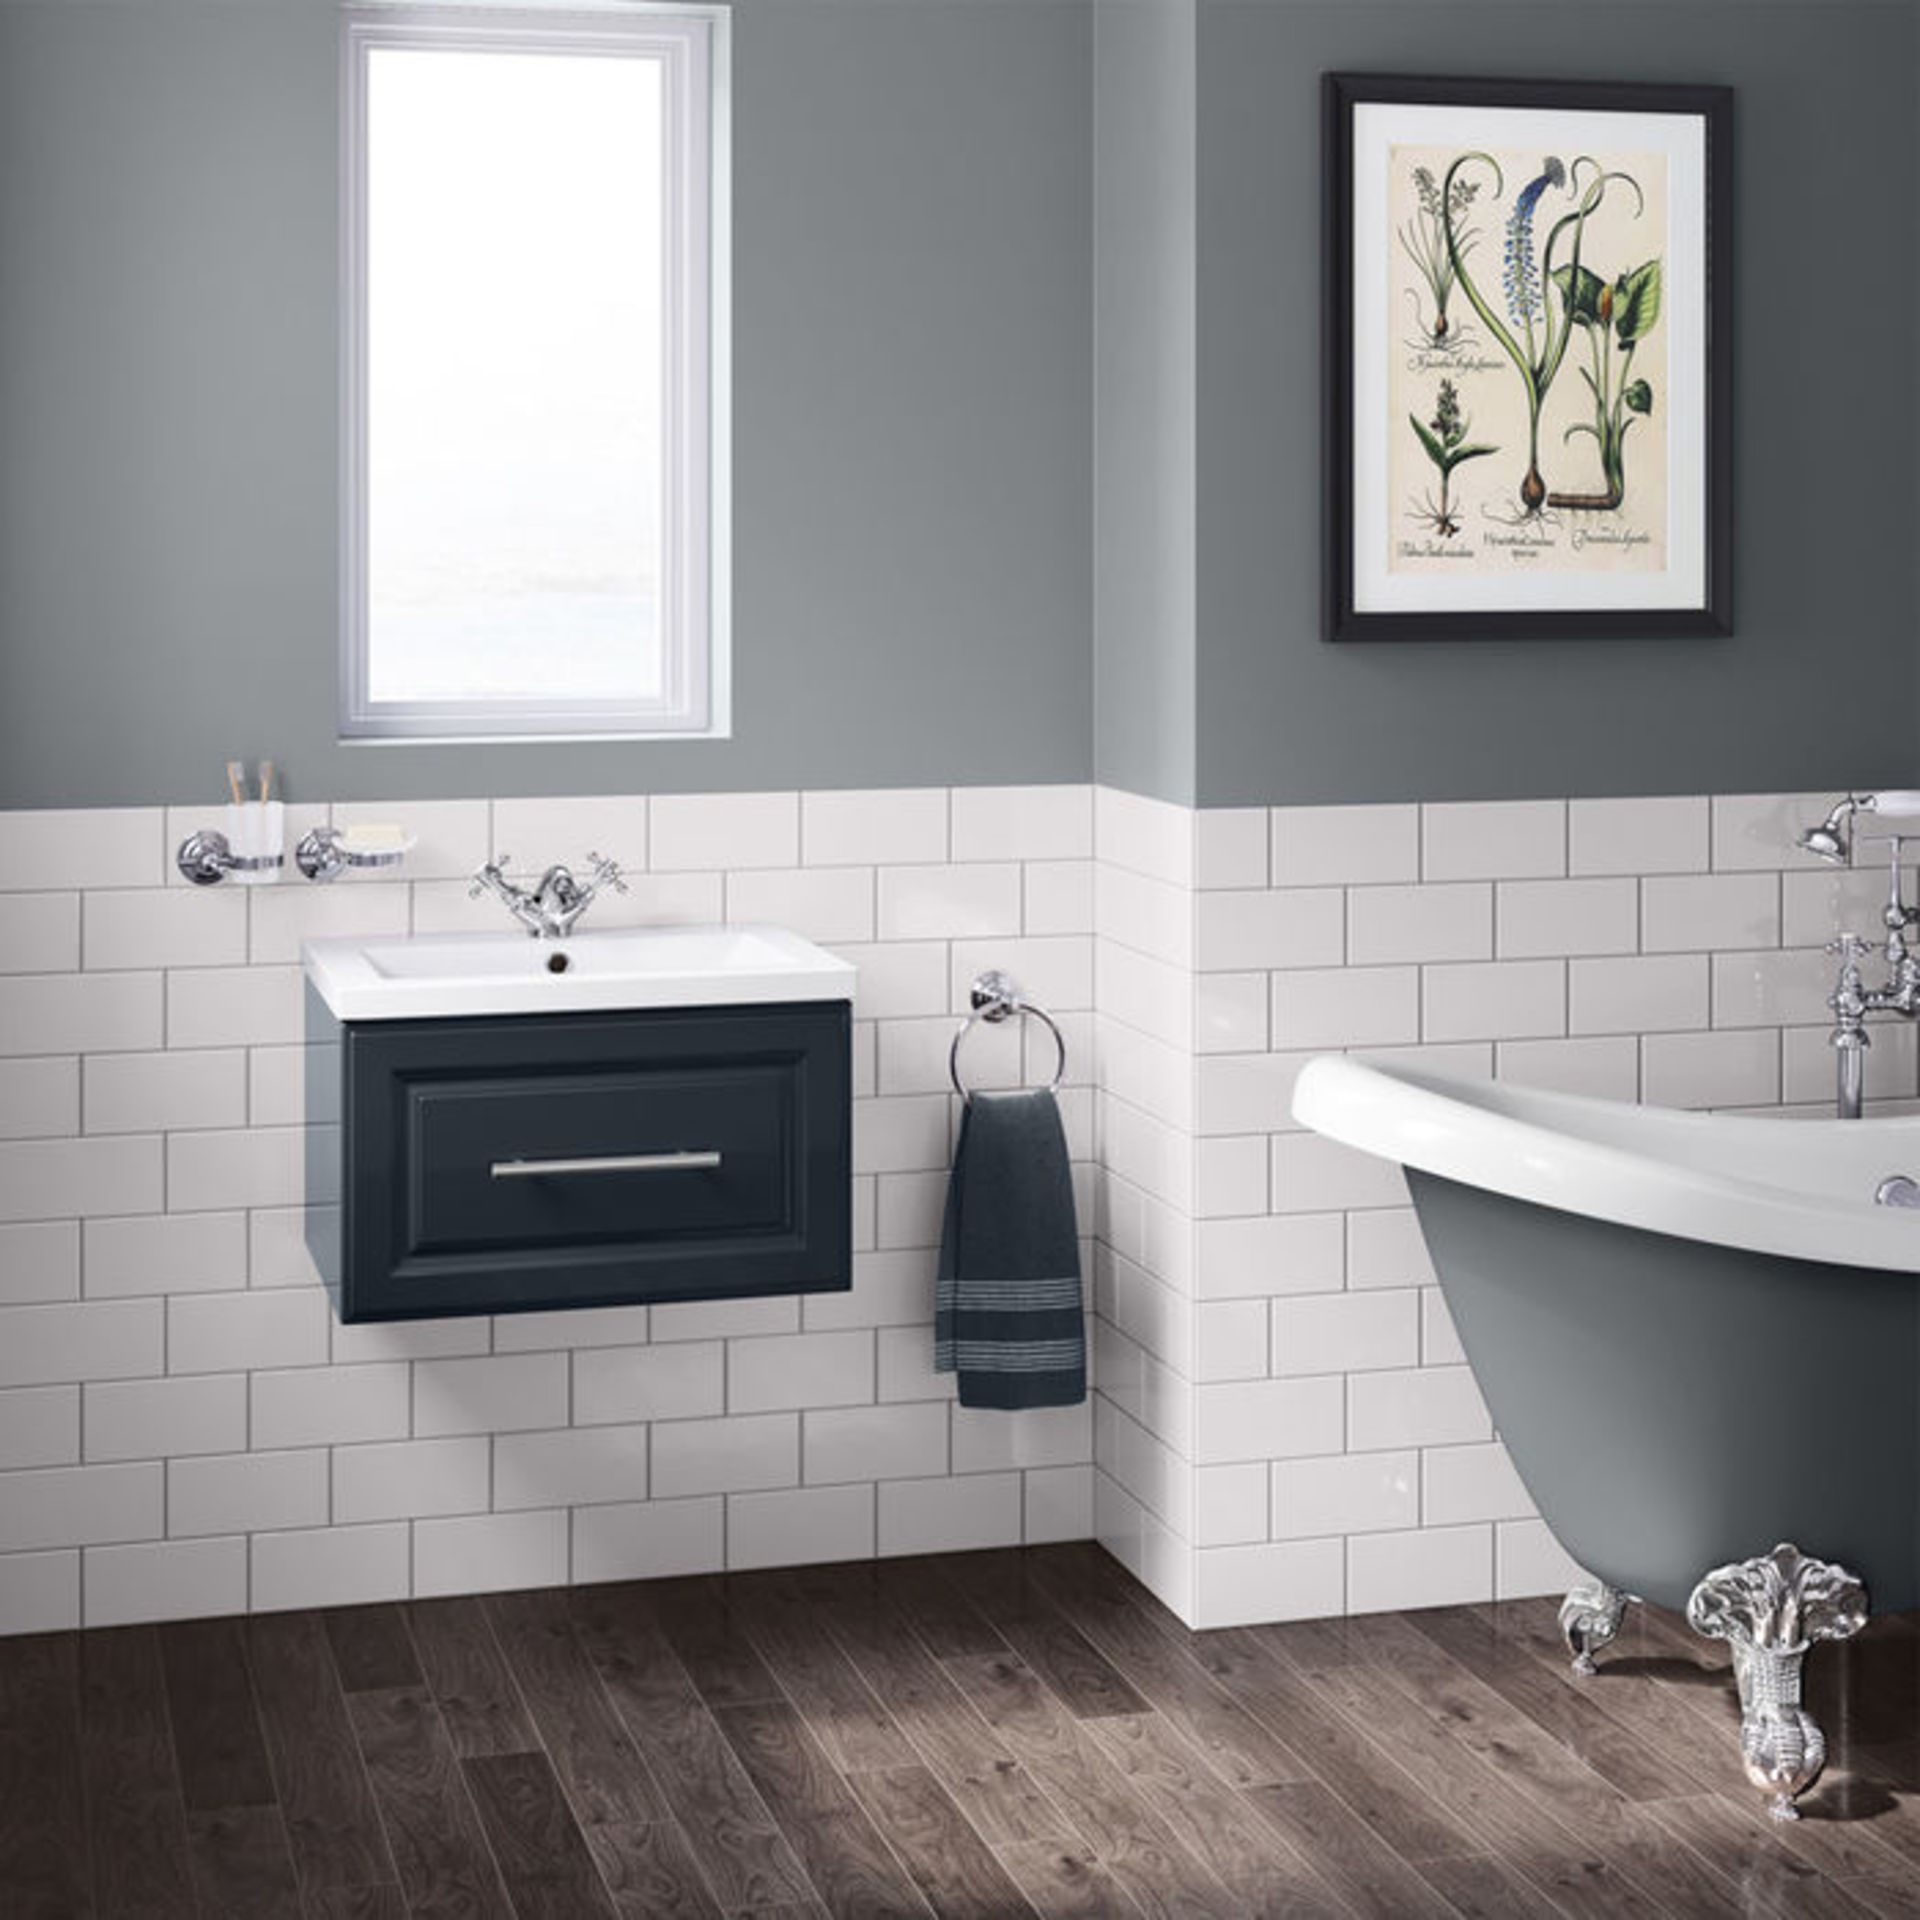 (XM188) 600mm Arden Gloss Black Blue Vanity Unit - Wall Hung. RRP £499.99. Comes complete with - Image 4 of 4